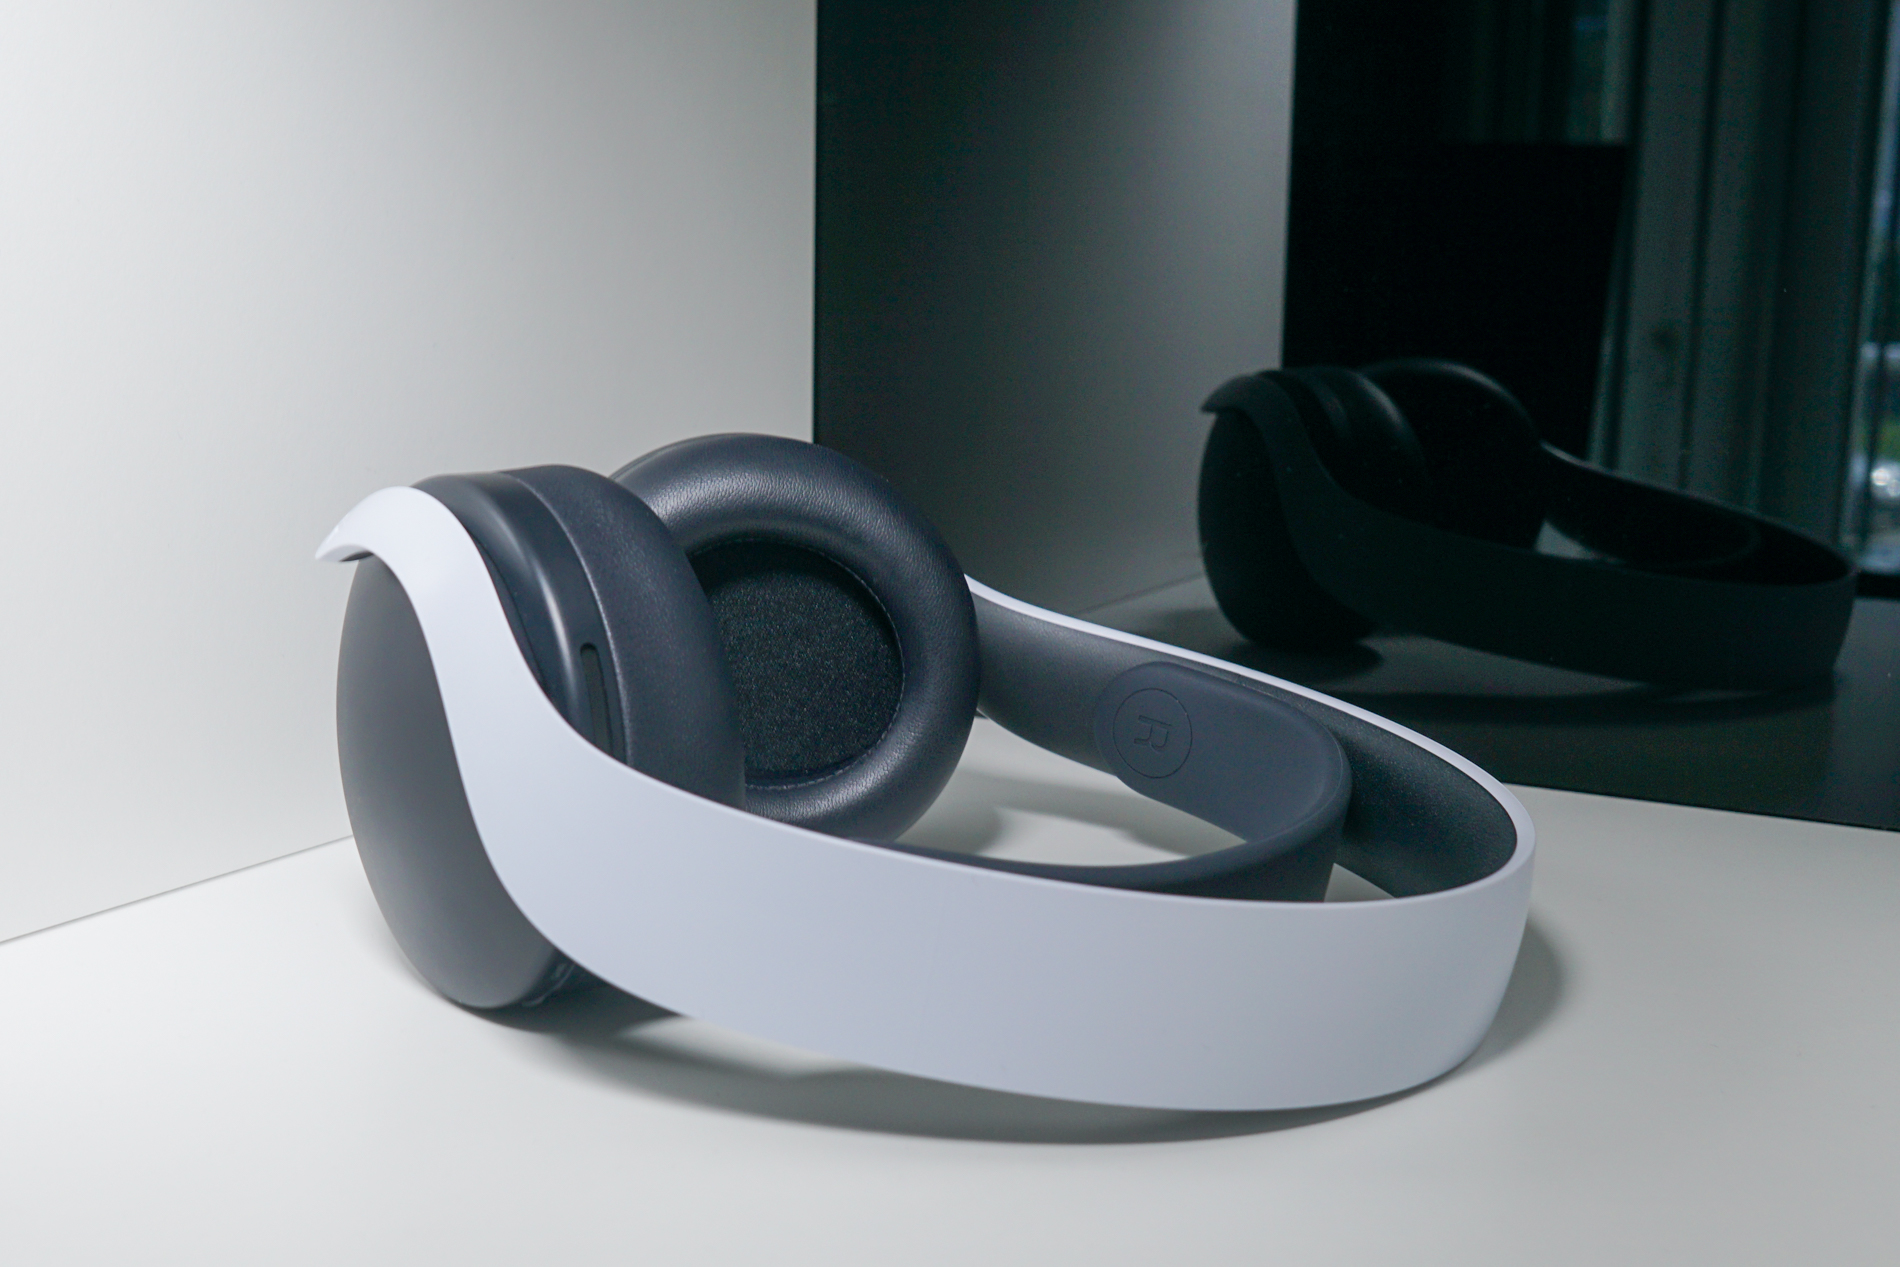 The Sony Pulse 3D Wireless Headset lays on a white shelf in front of a black reflective surface.